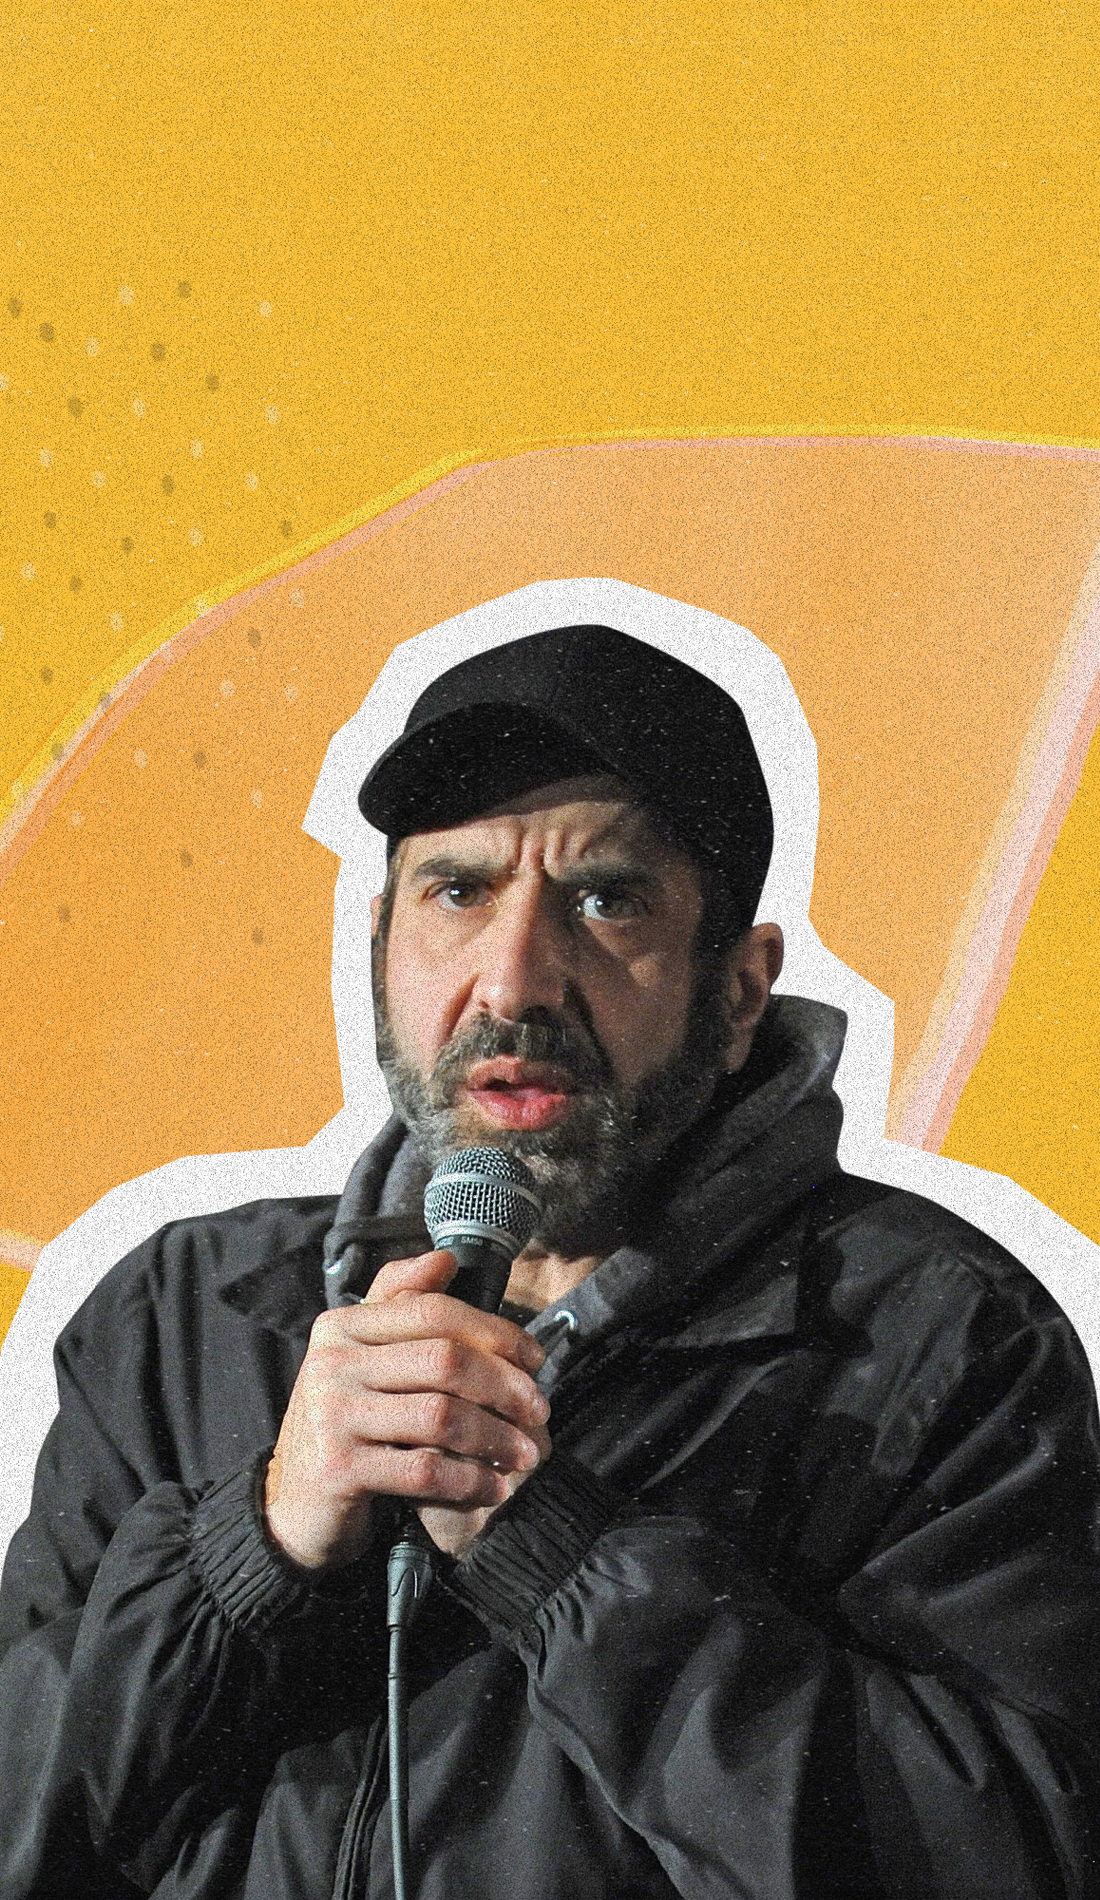 A Dave Attell live event